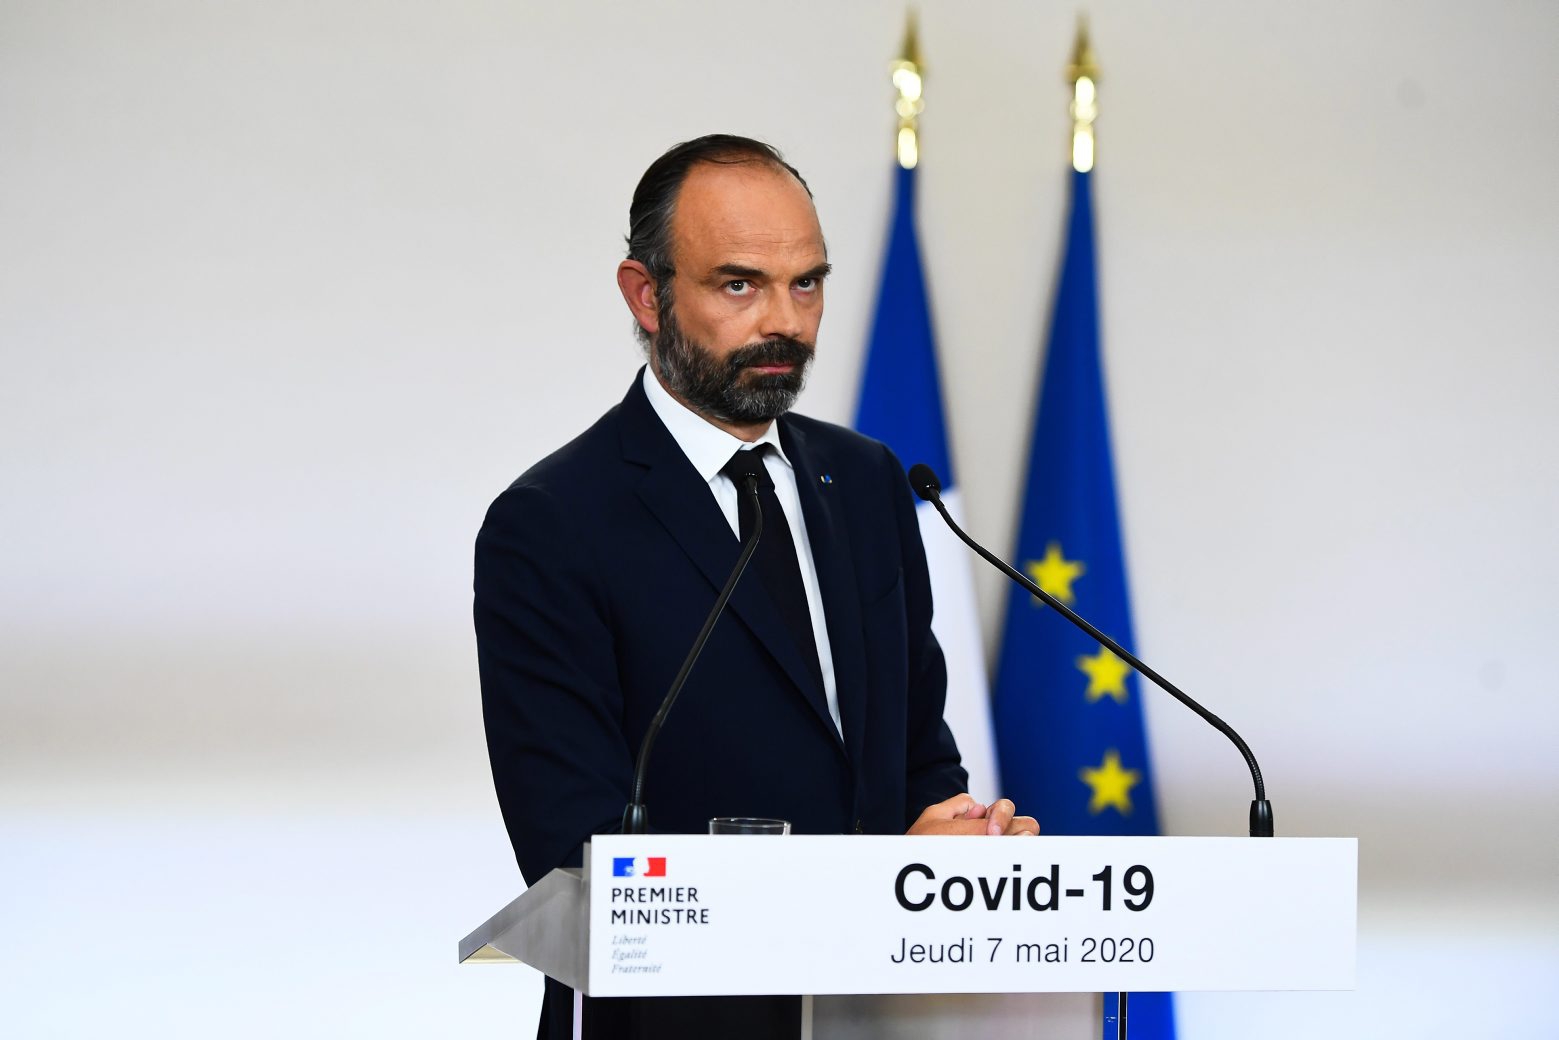 epa08407830 French Prime Minister Edouard Philippe attends a press conference to present details on easing the country's lockdown amid the ongoing coronavirus COVID-19 pandemic at the Hotel Matignon in Paris, France, 07 May 2020. France is on the 52nd day of a strict lockdown to stop the spread of the COVID-19 disease caused by the SARS-CoV-2 coronavirus.  EPA/CHRISTOPHE ARCHAMBAULT / POOL  MAXPPP OUT FRANCE PANDEMIC CORONAVIRUS COVID19